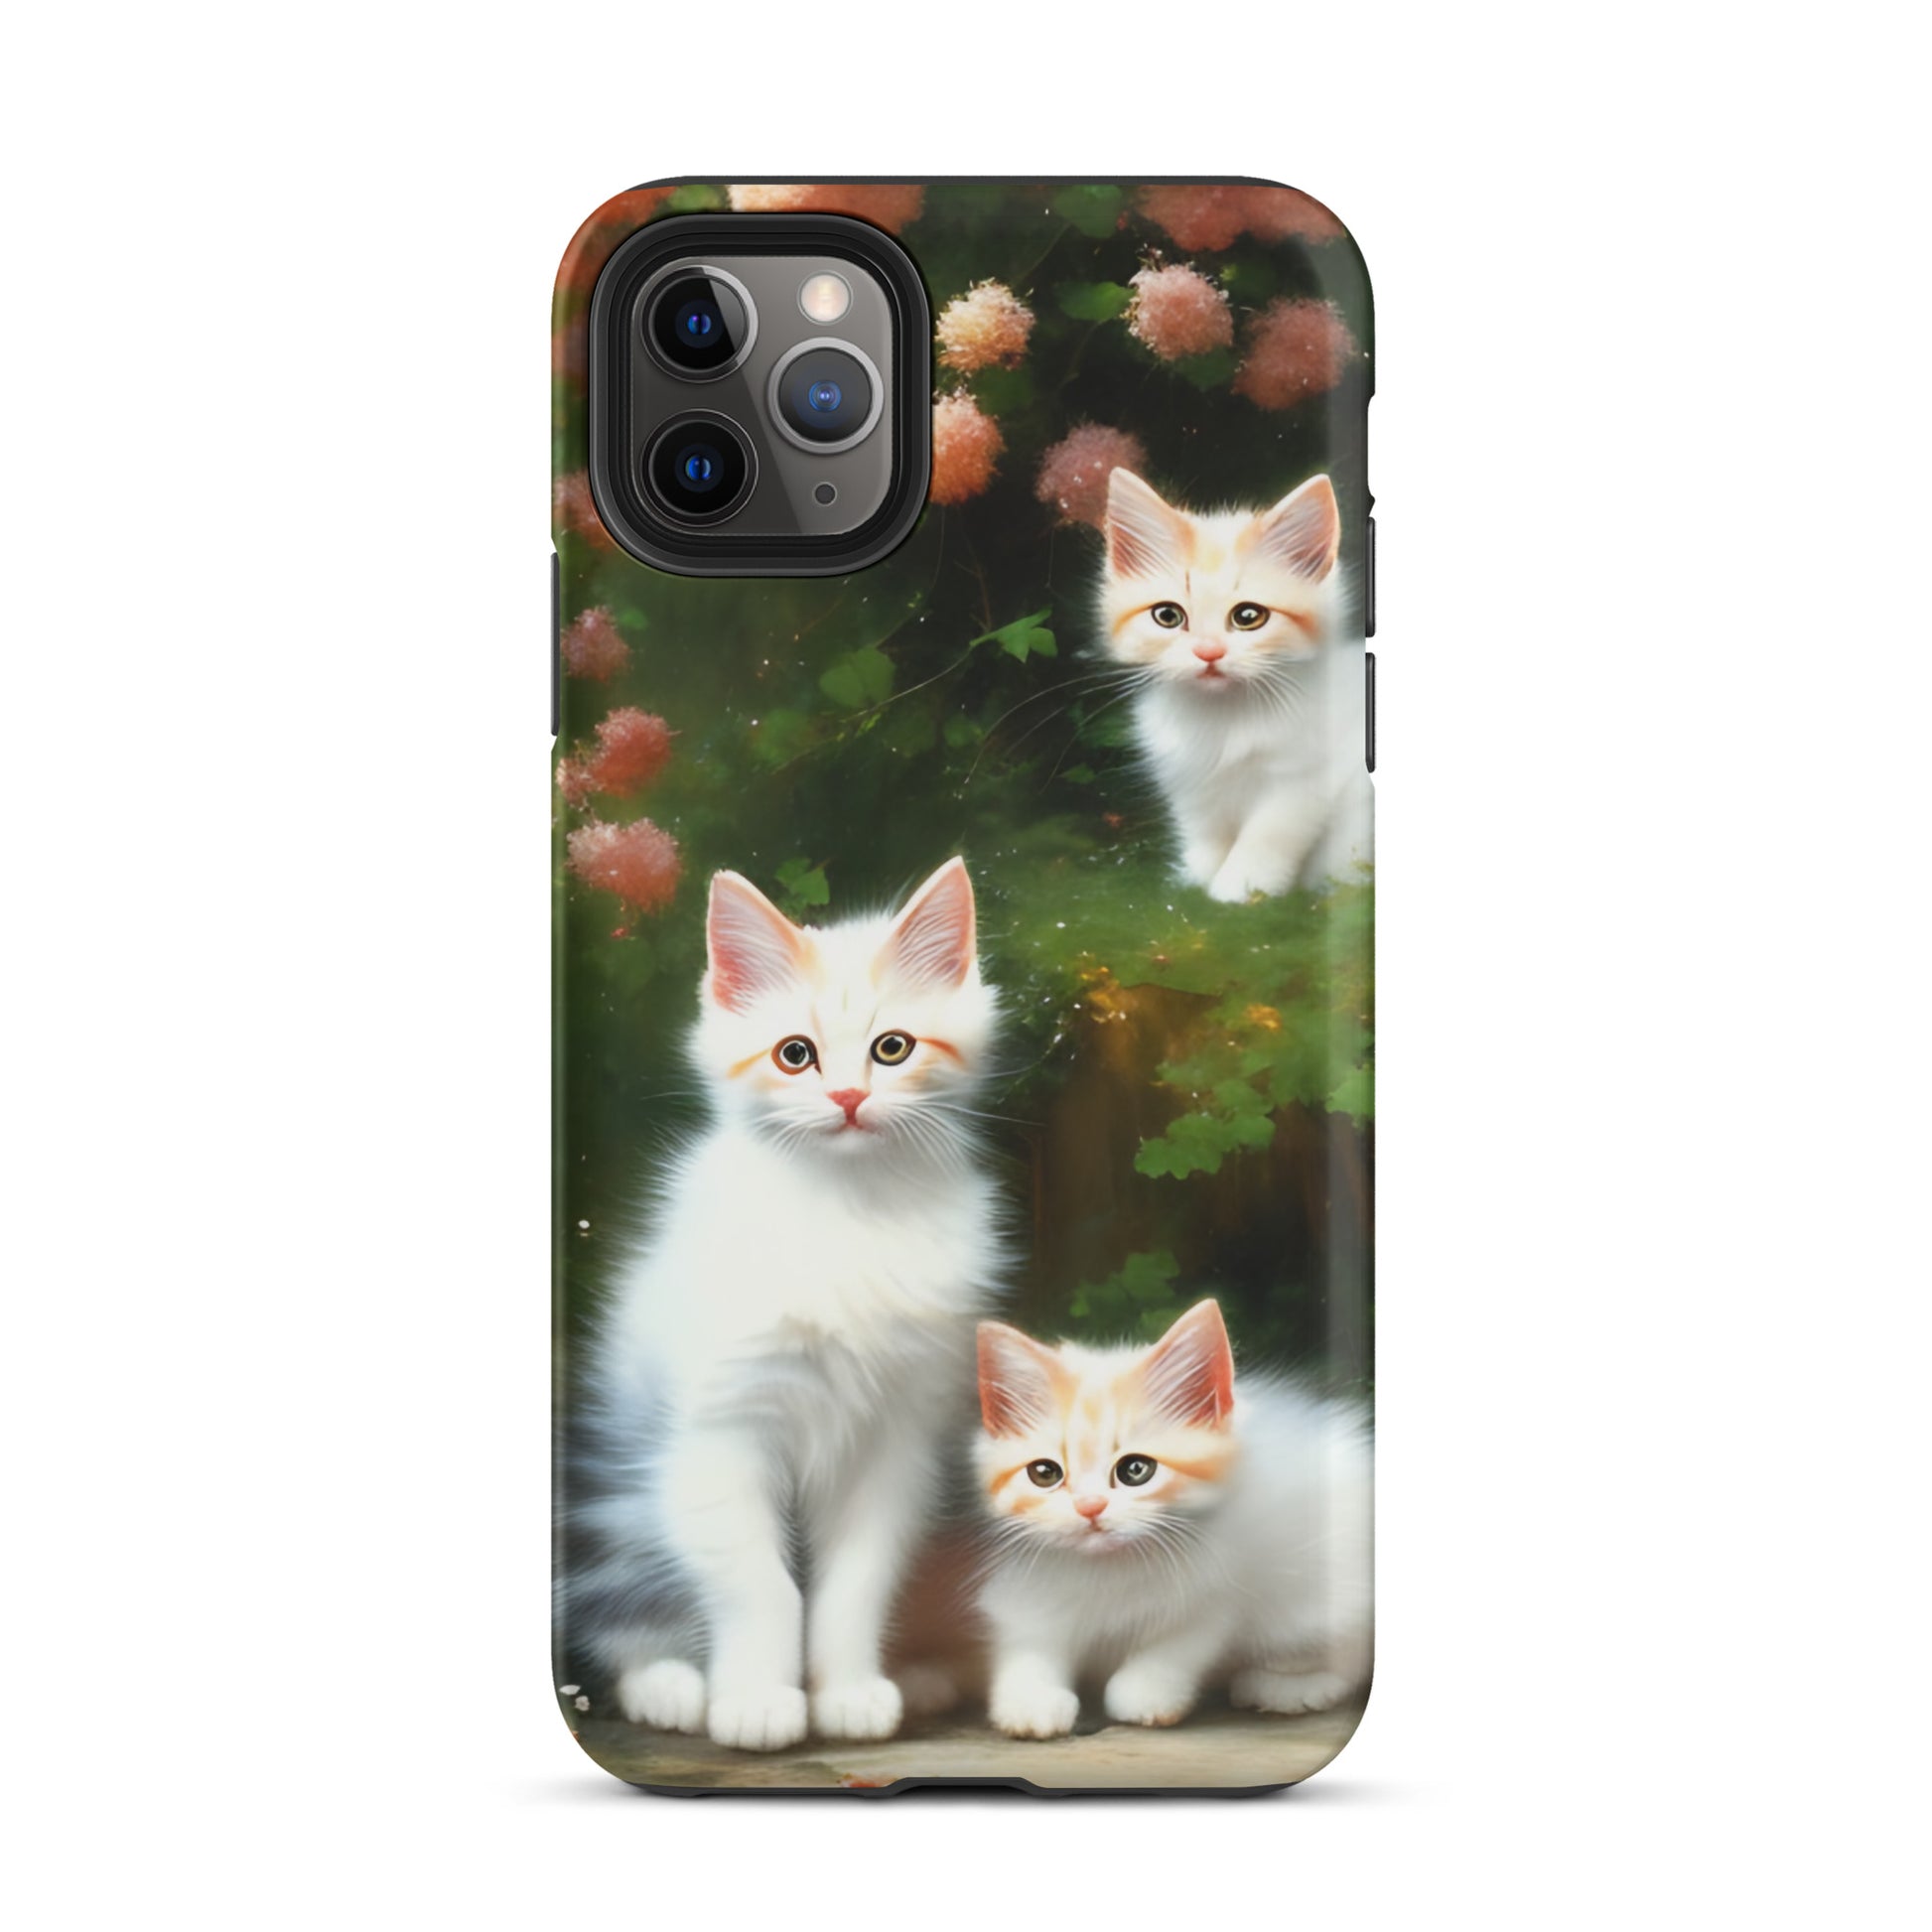 A picture of a iphone tough case with 3 fluffy white and orange kittens and peach colored flowers in the background - matte-iphone-11-pro-max-front